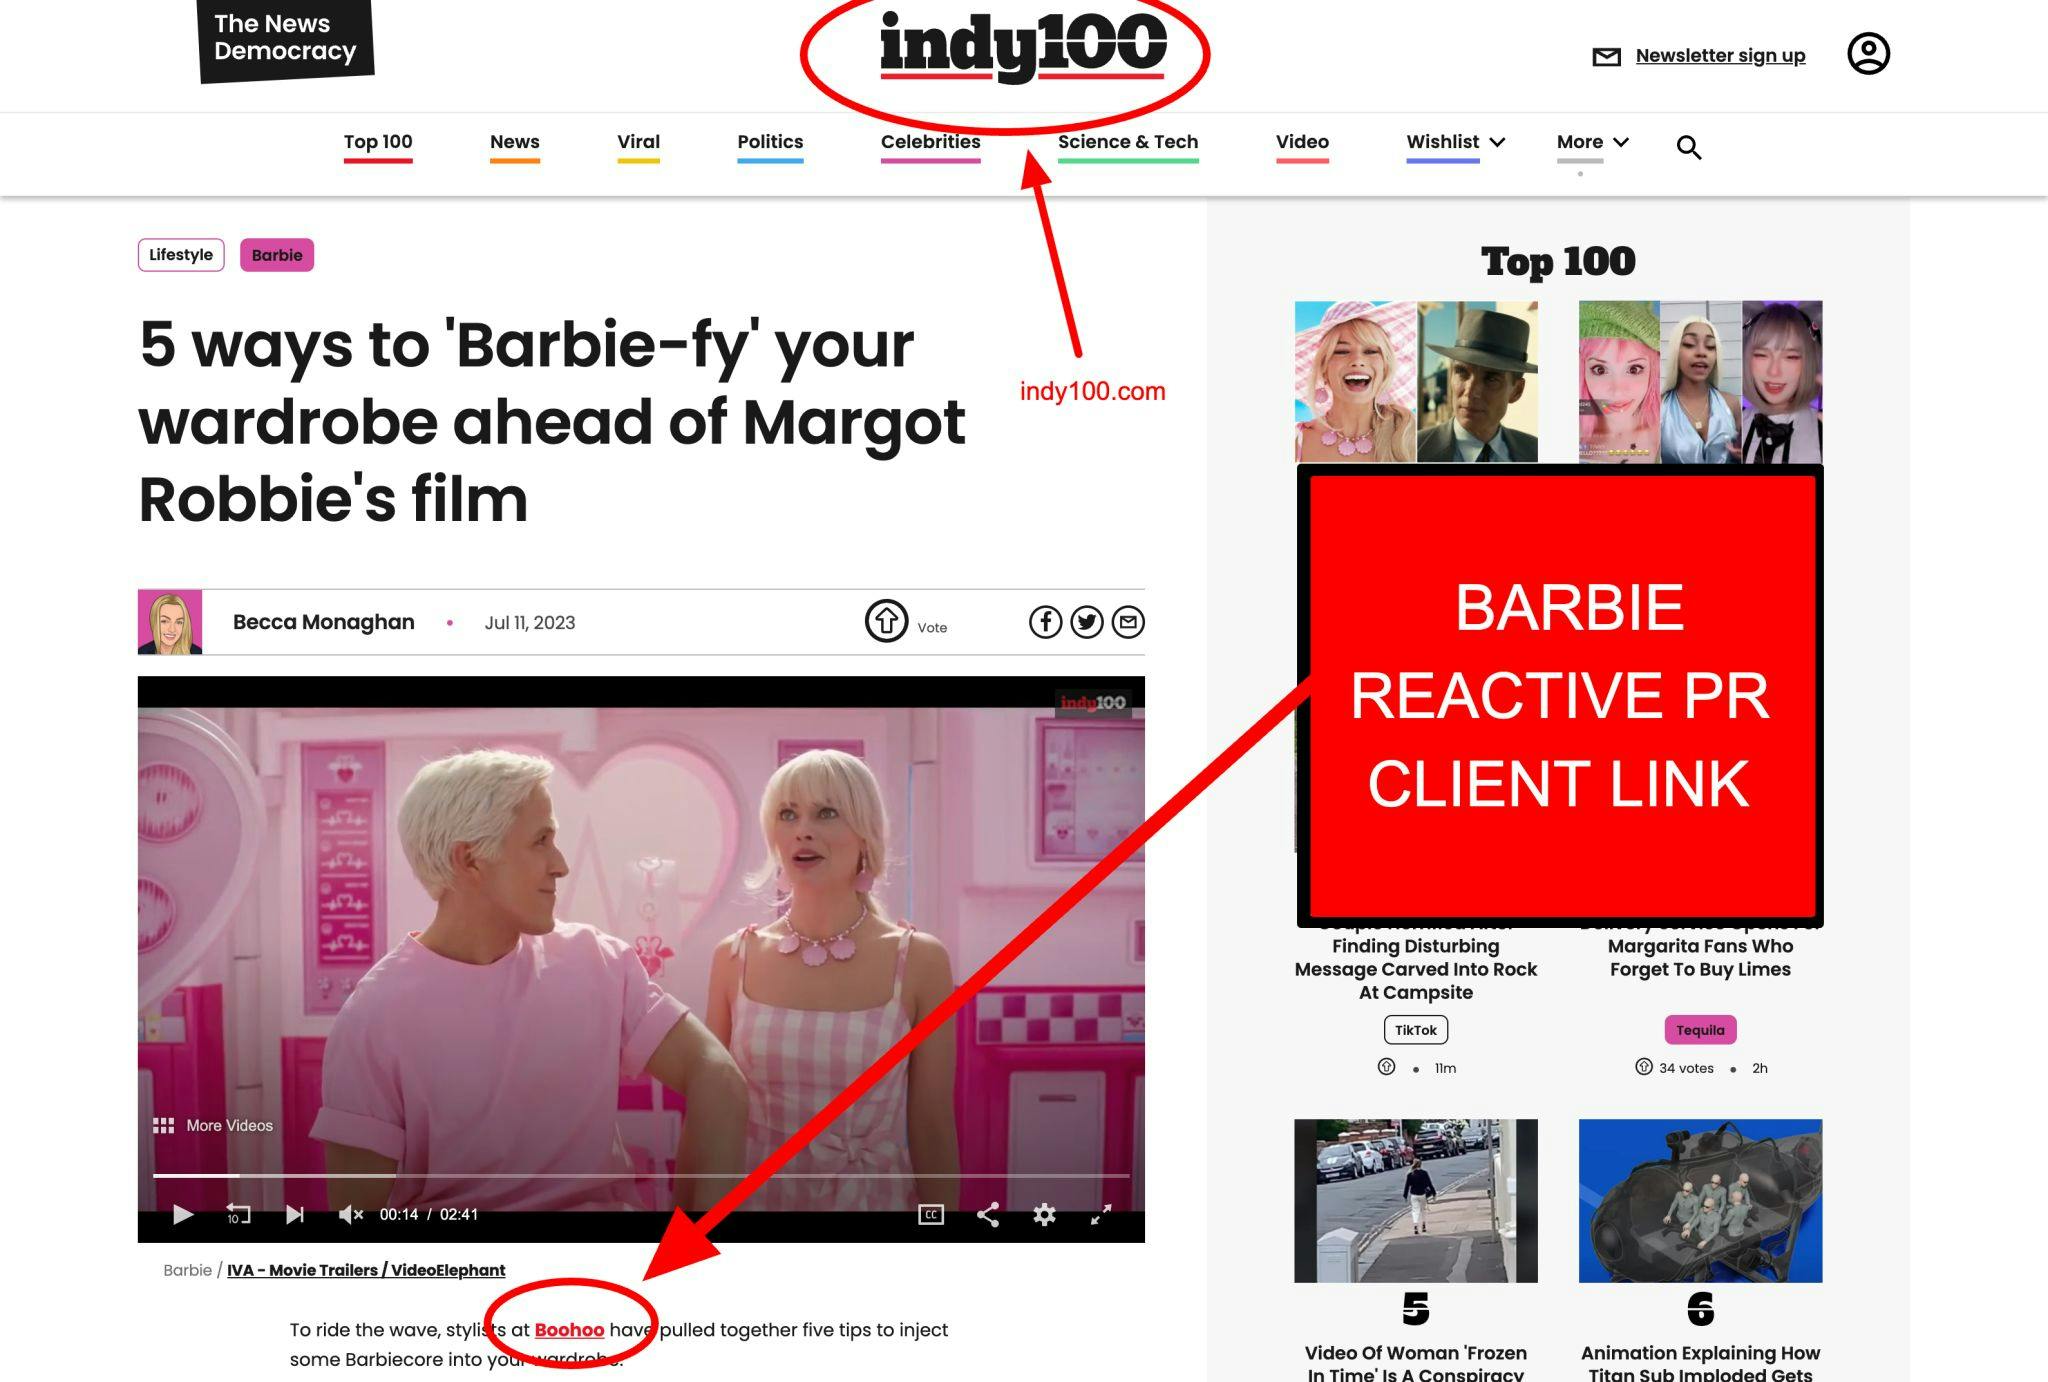 How Search Intelligence reacted to the Barbie movie and landed links in Indy 100, Yahoo News, MSN, and more for their Fashion Client